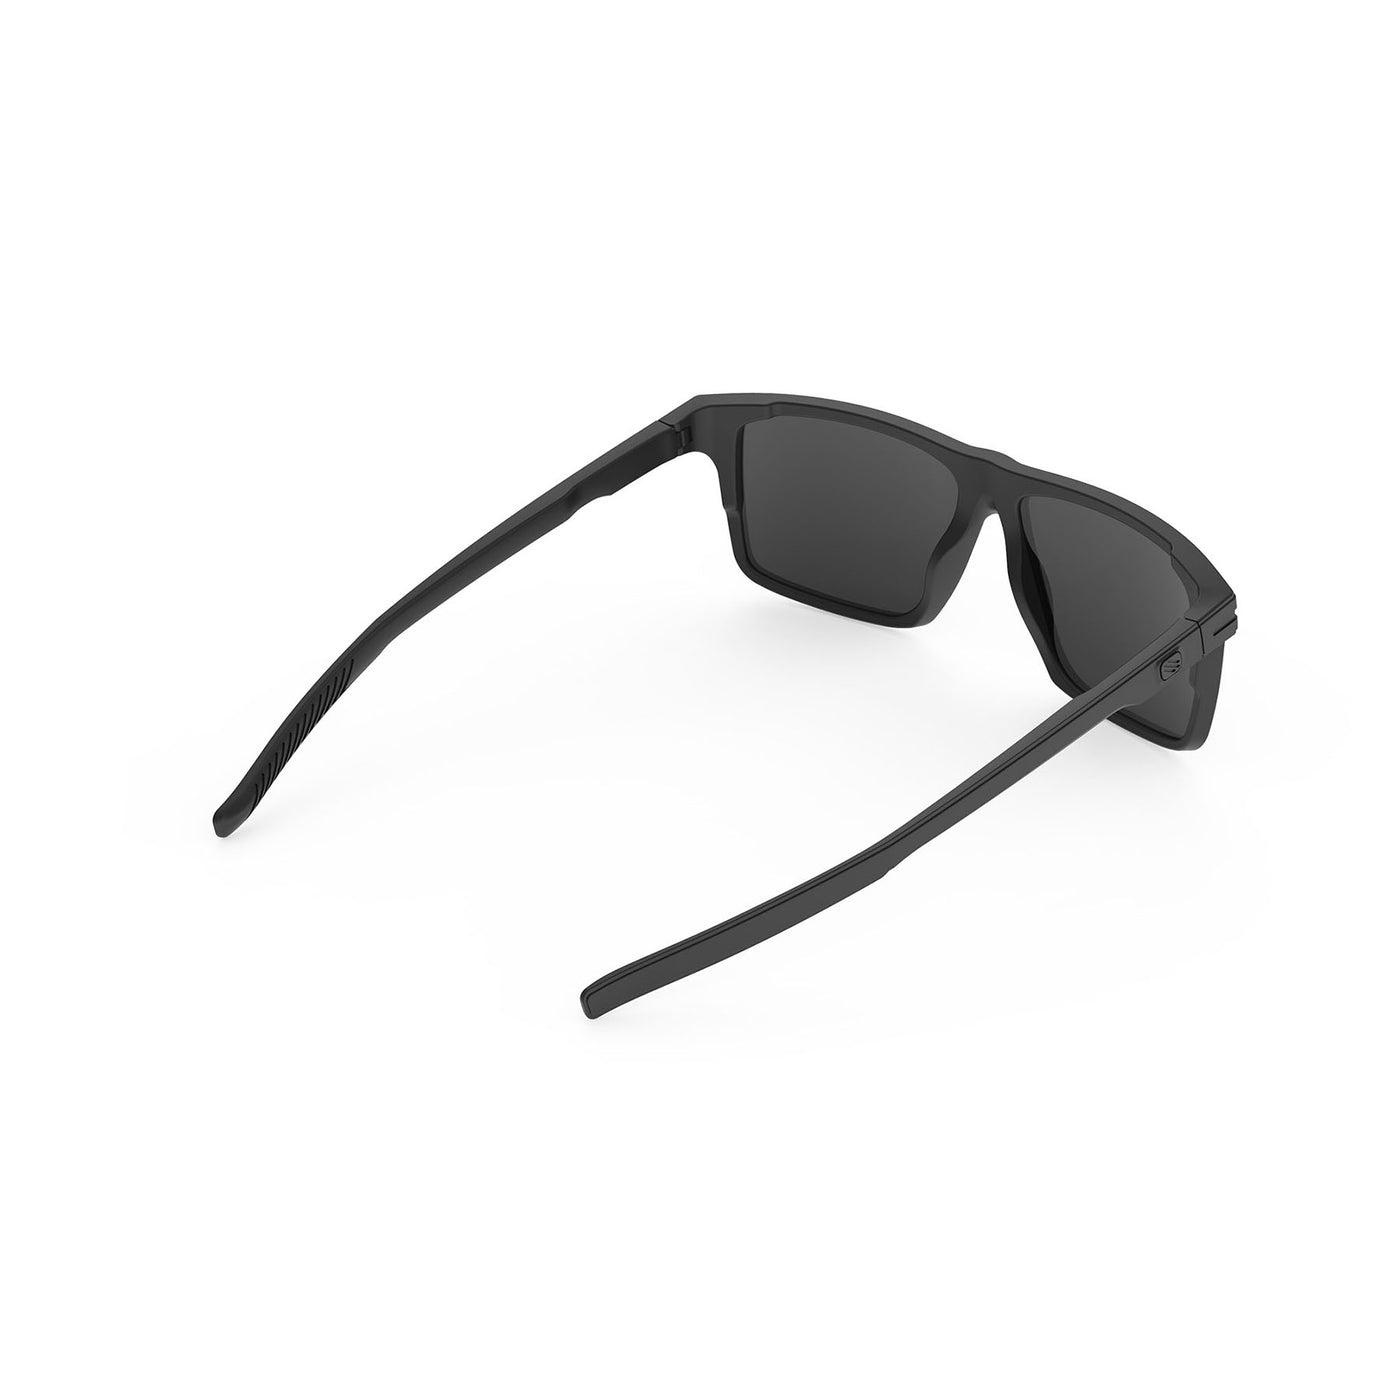 Rudy Project Stellar lifestyle, beach, boating and fishing prescription sunglasses#color_stellar-matte-black-frame-with-smoke-black-lenses